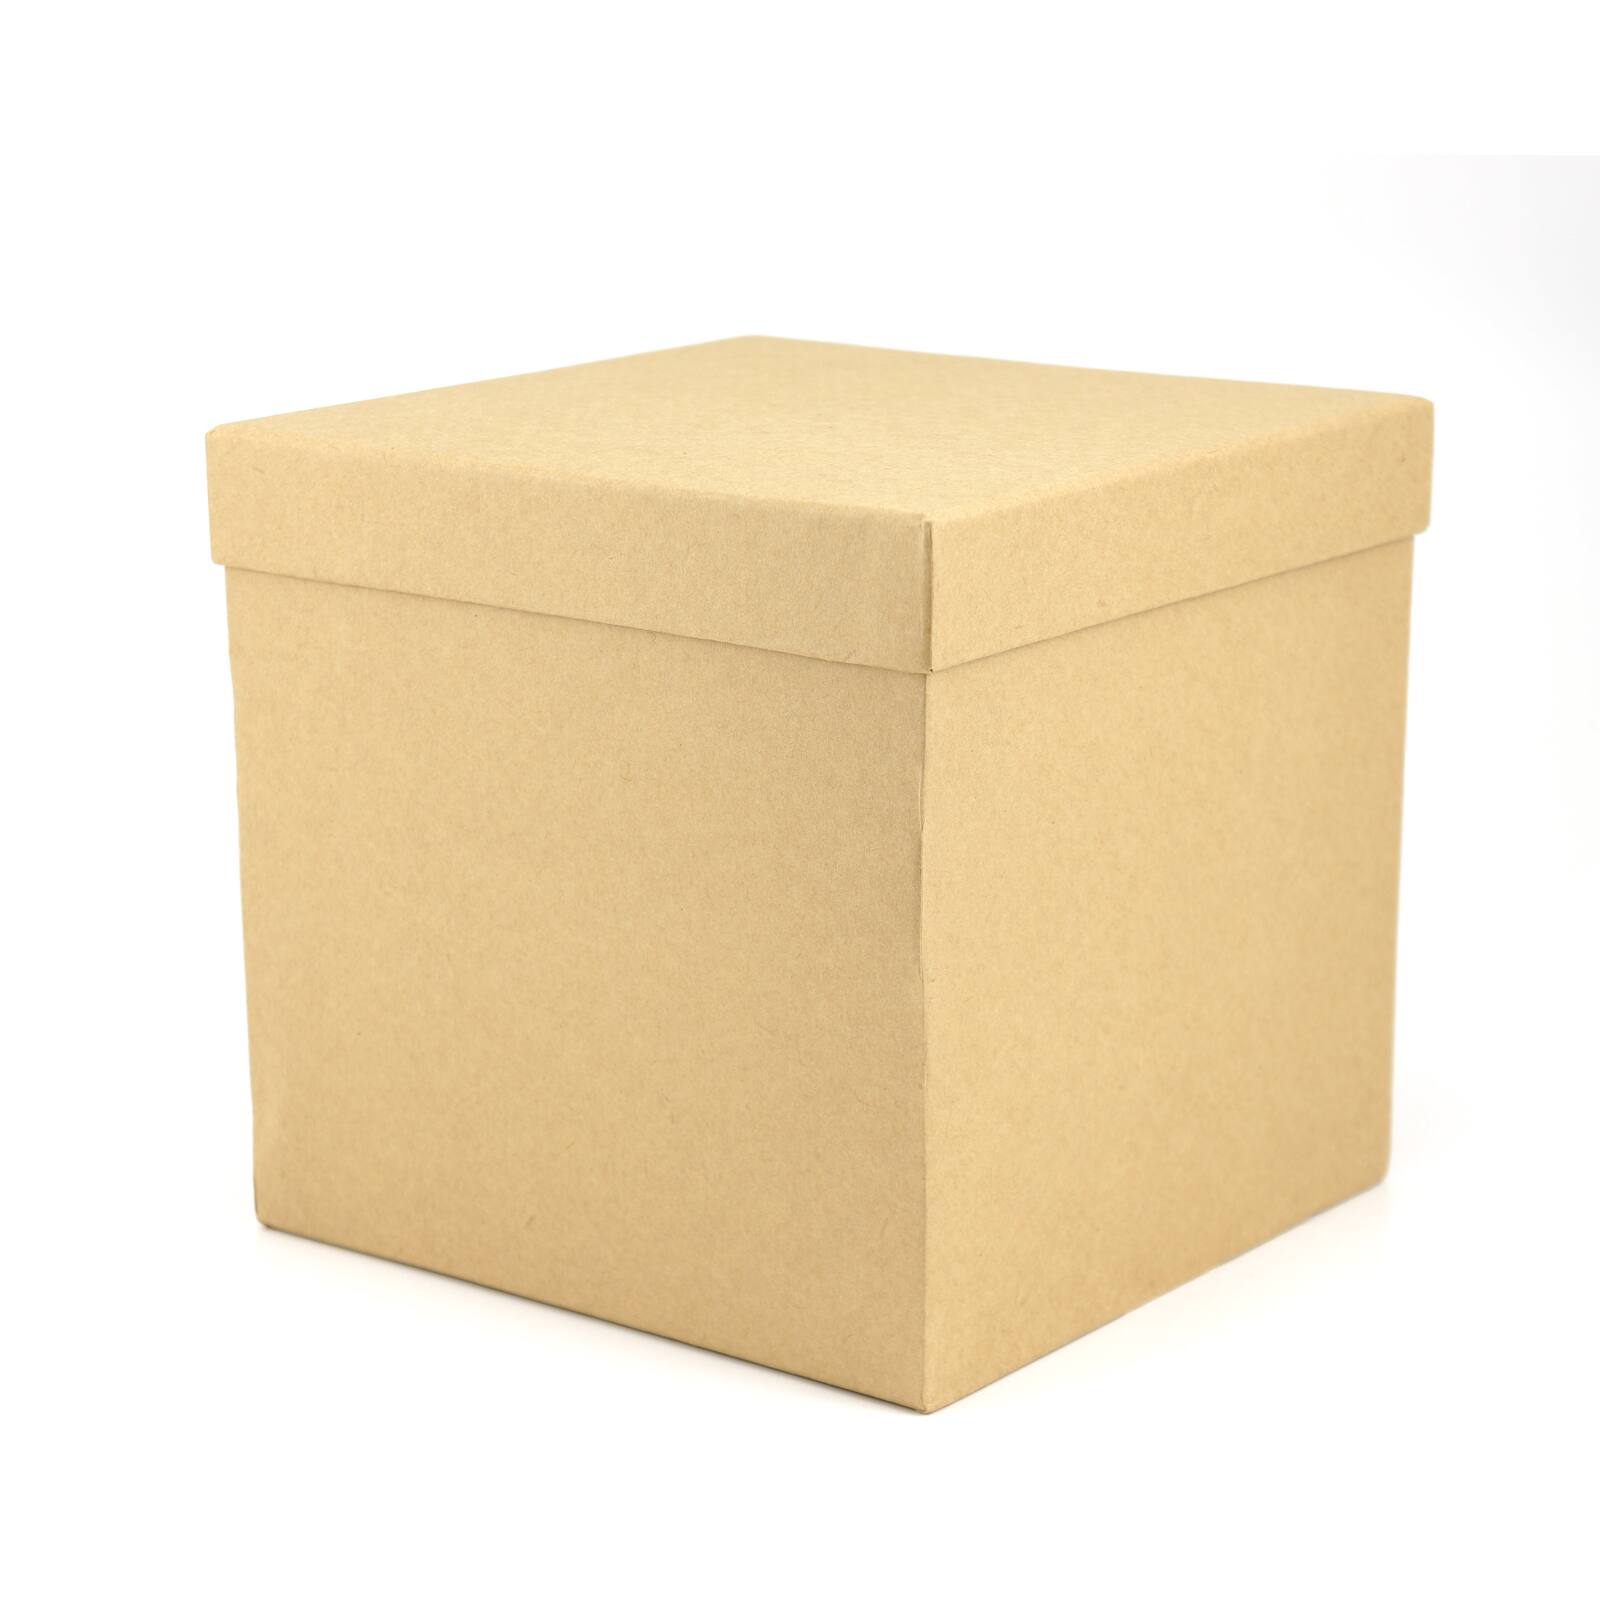 Shop for Large Kraft Box by Celebrate It® at Michaels